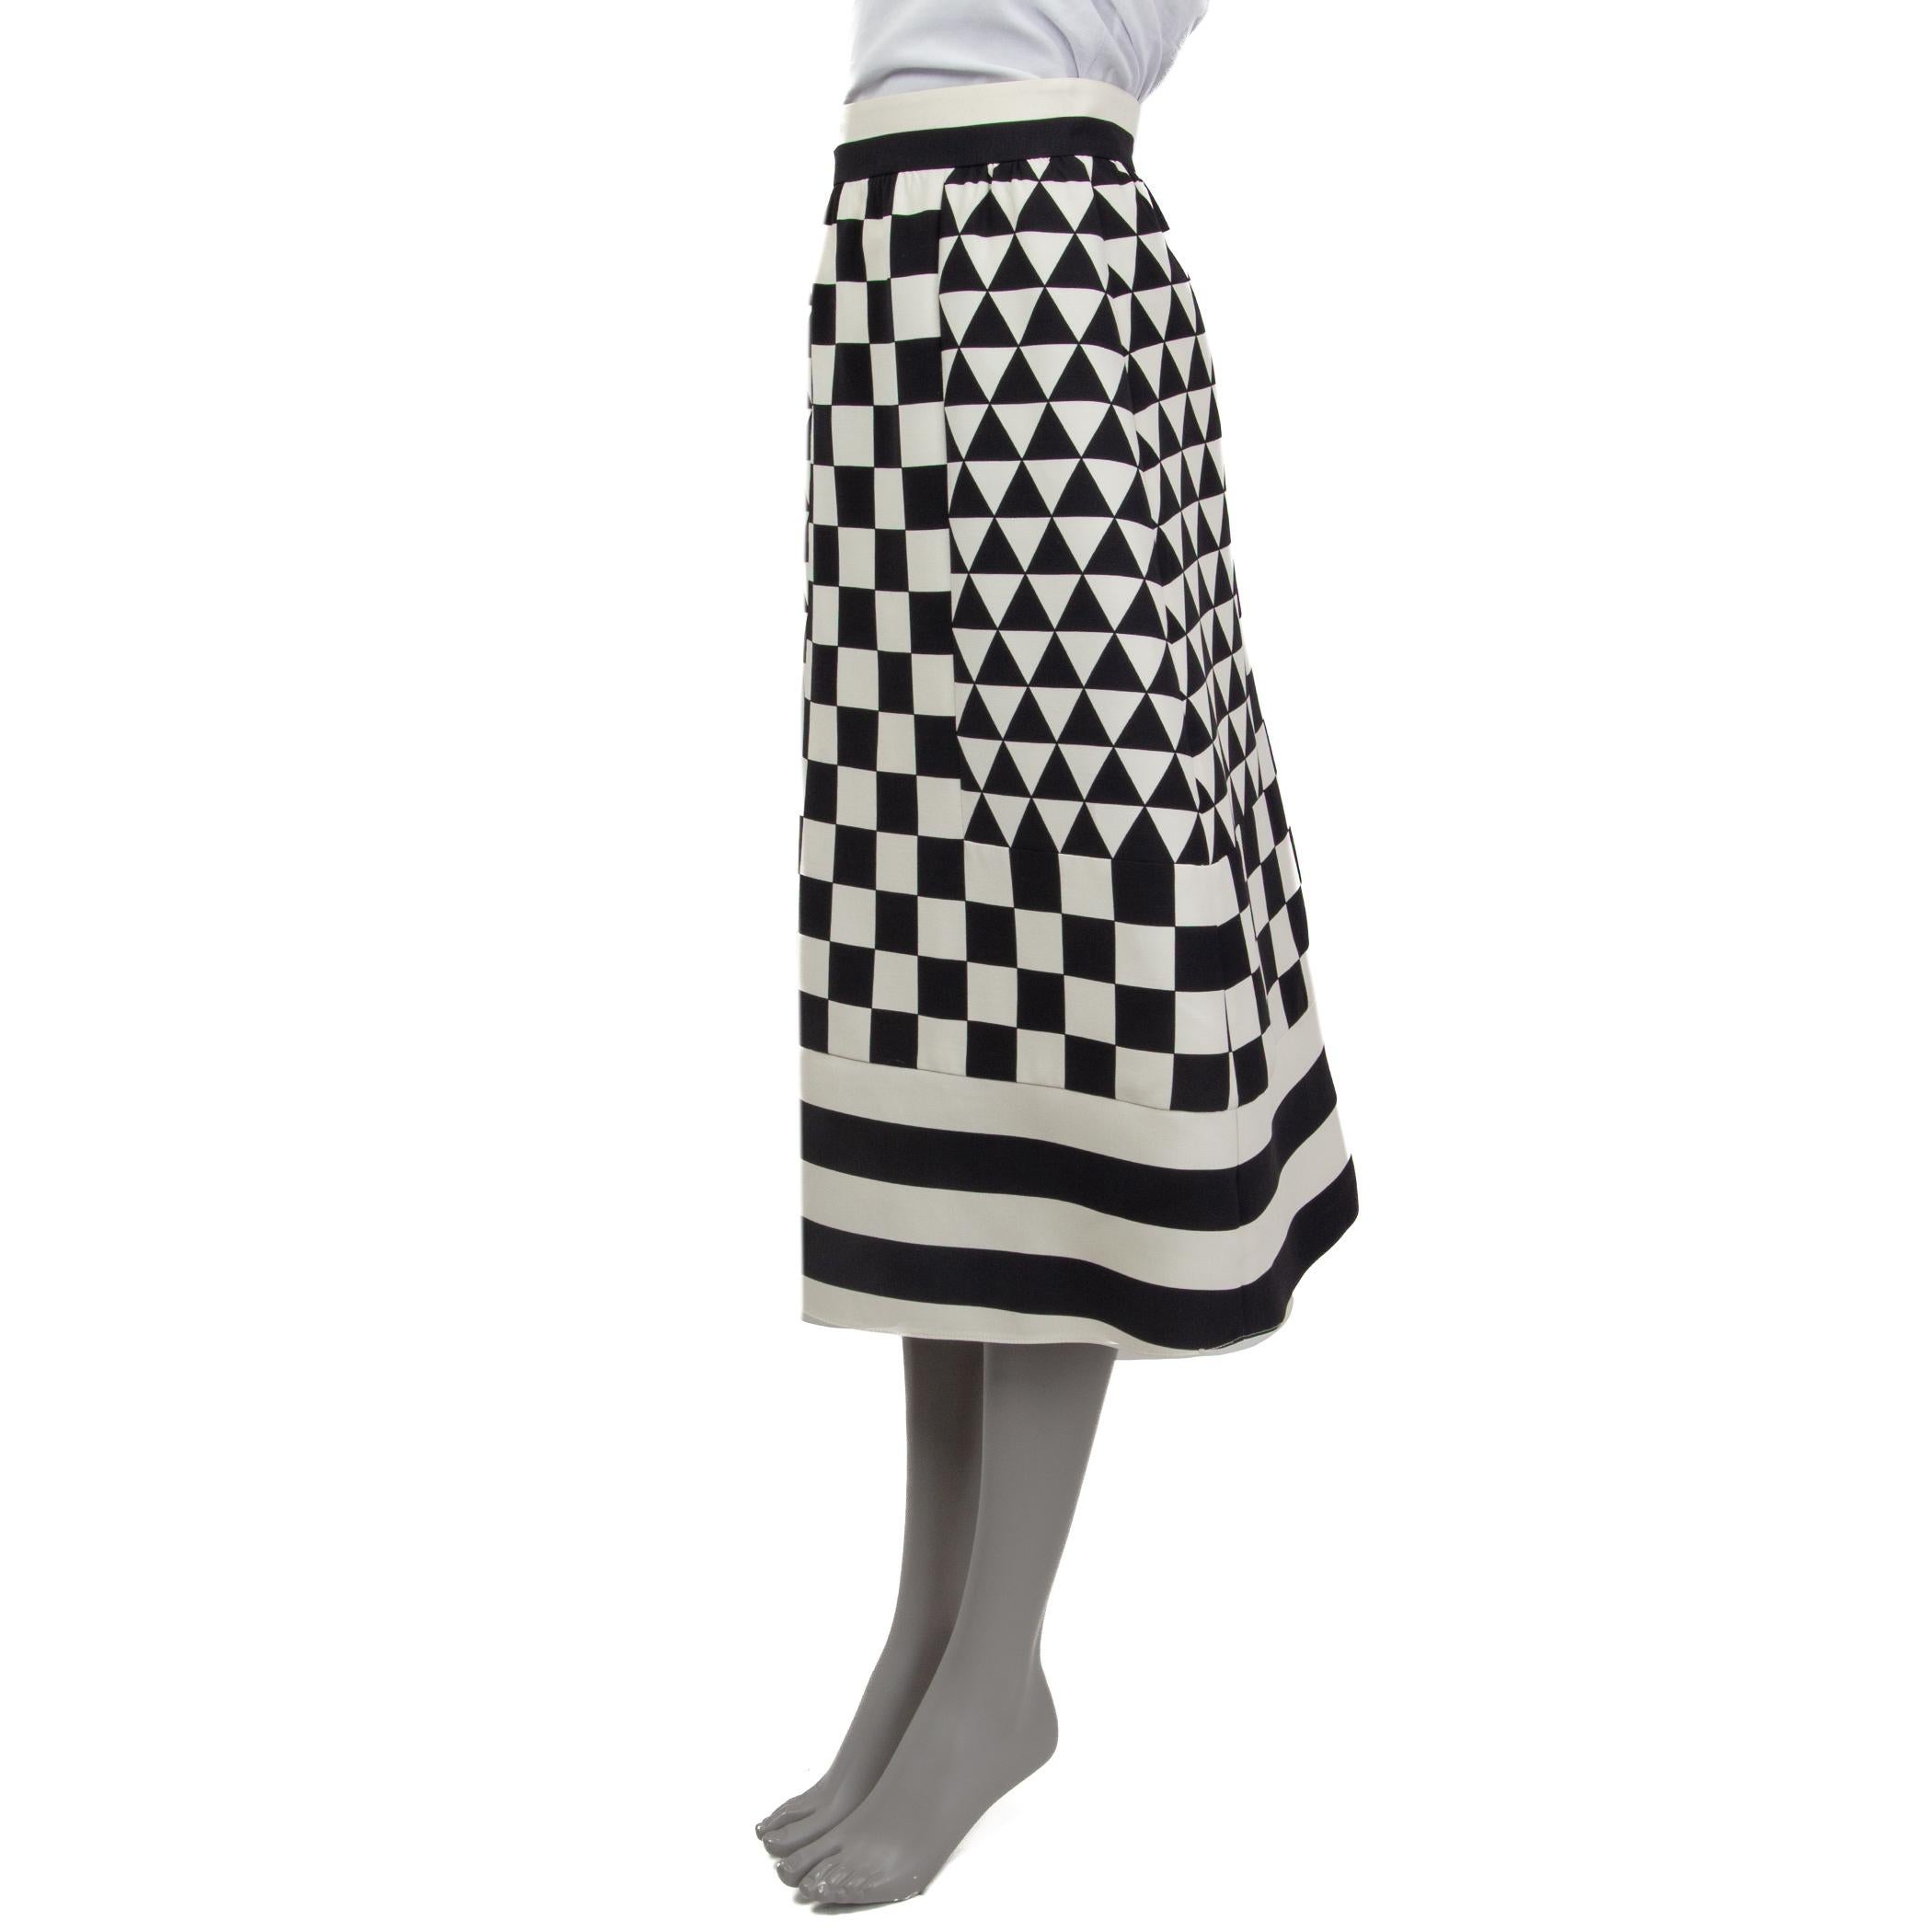 100% authentic Valentino geometric checkerboard-print midi skirt in black and off-white virgin wool (65%) and silk (35%). Features two slit pockets on the side. Opens with concealed zipper and a hook at the back. Lined in off-white silk (100%). Has